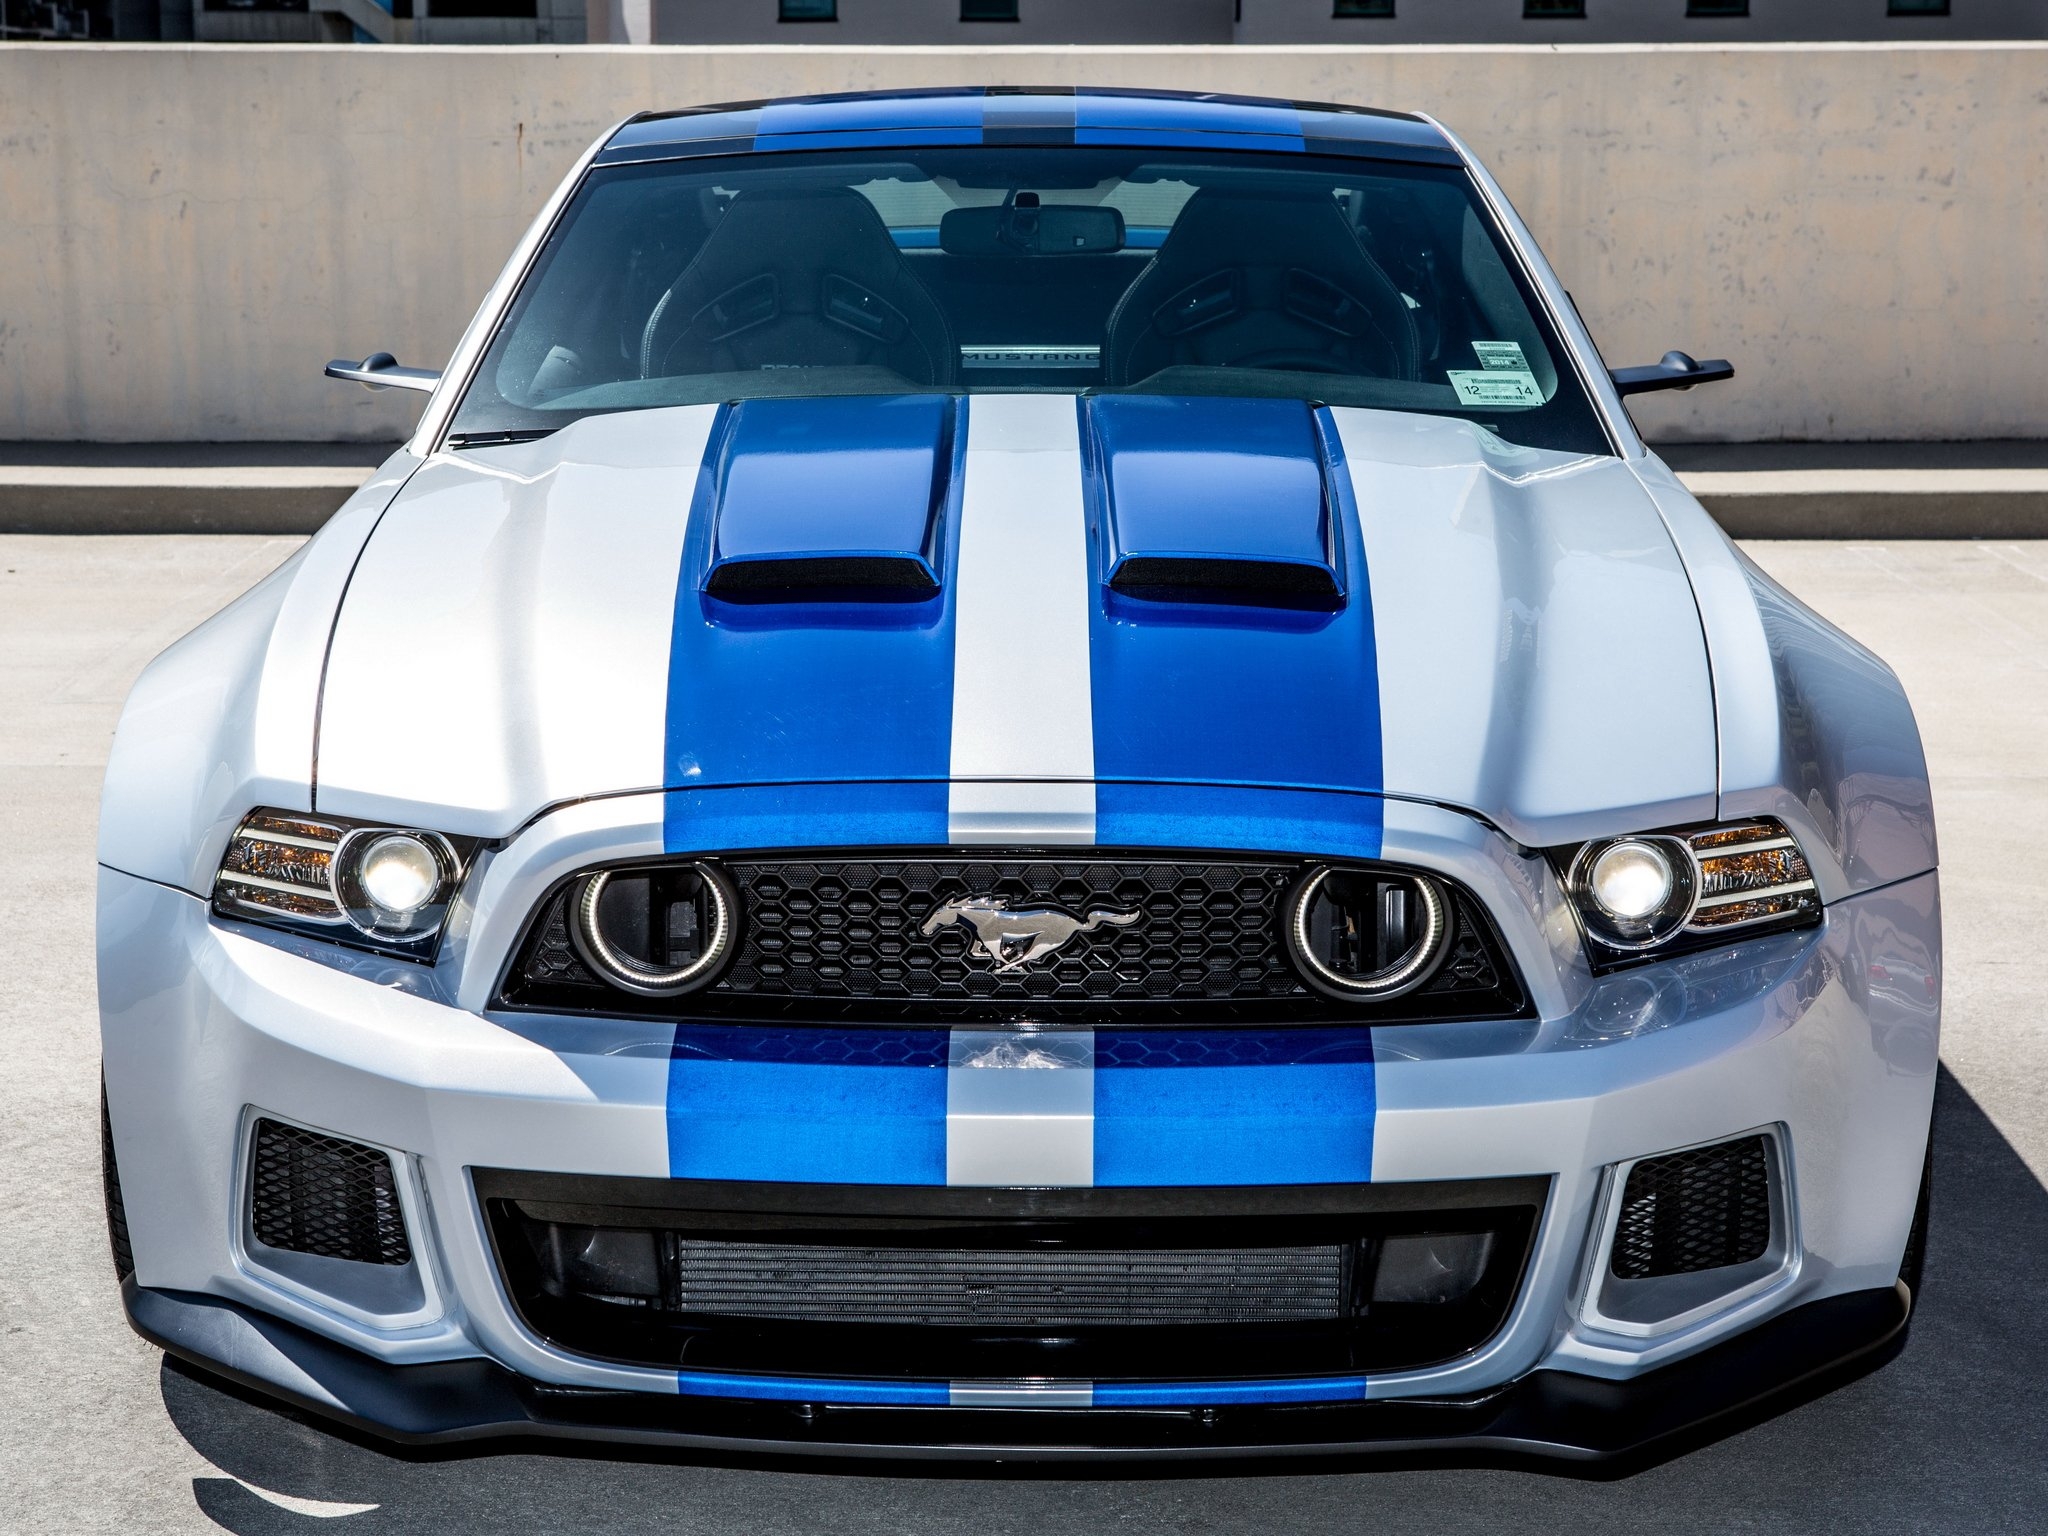 Ford Mustang Shelby 2014. Ford Shelby gt500 2014. Ford Mustang Shelby gt500 2014. Ford Mustang gt 2014. Форд мустанг нфс